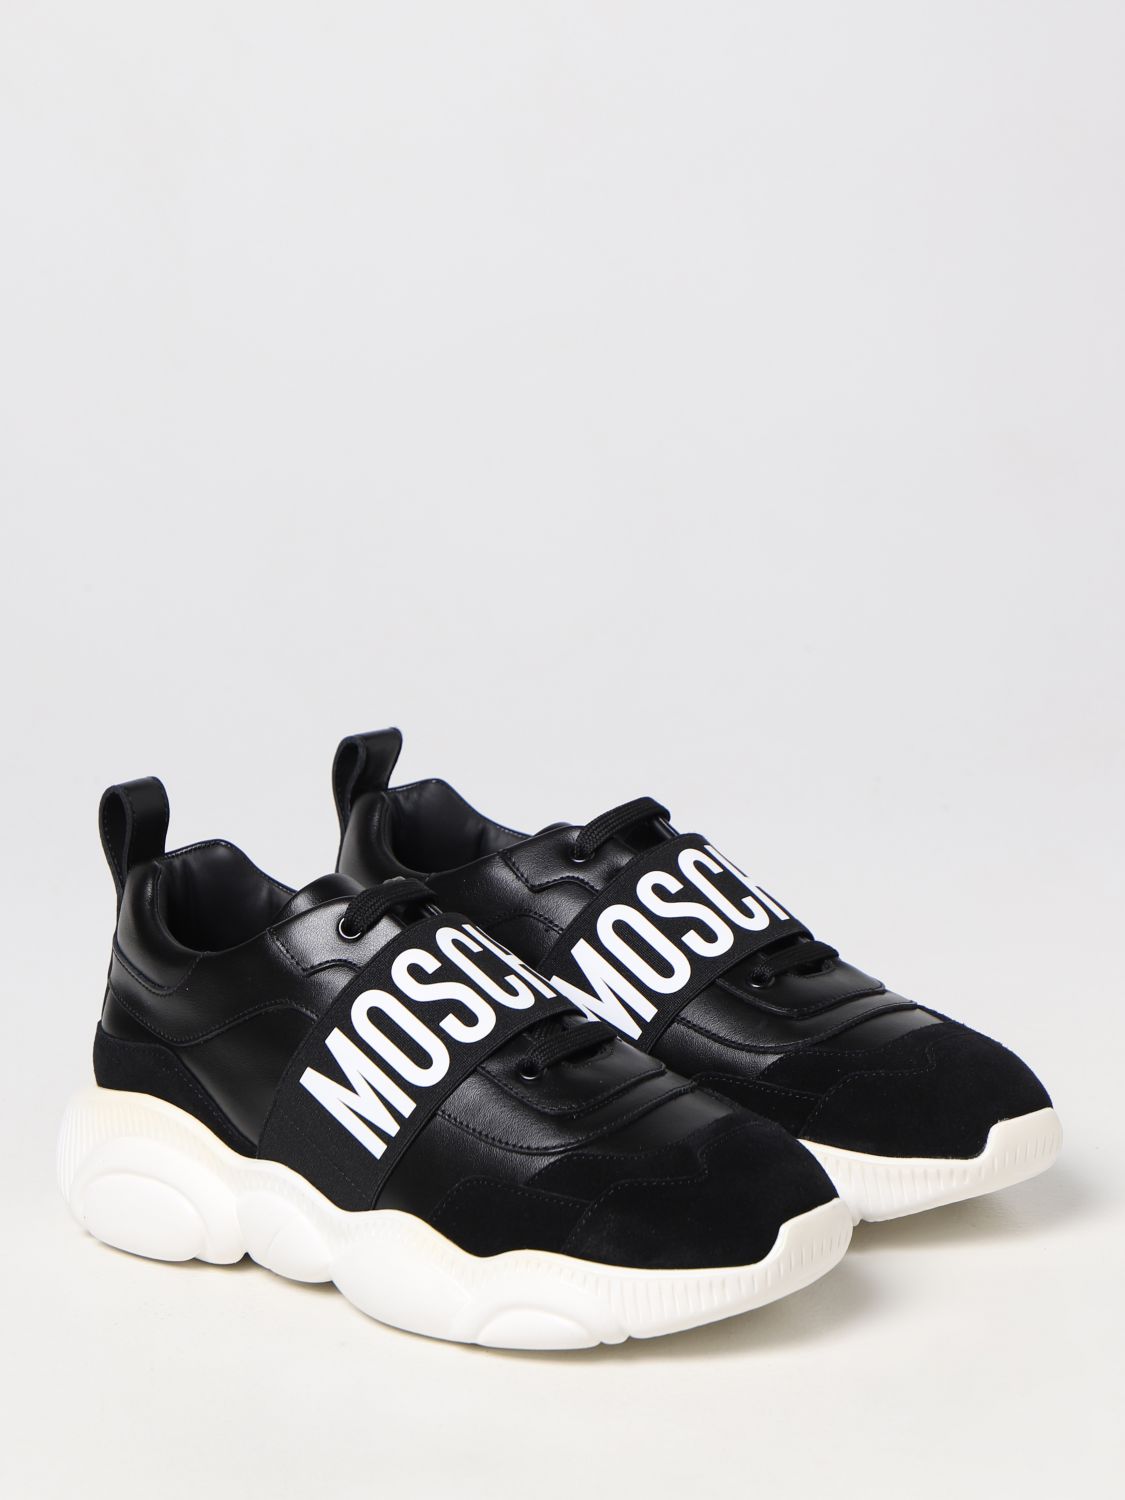 Moschino Couture Outlet: sneakers for man - Black | Moschino Couture ...